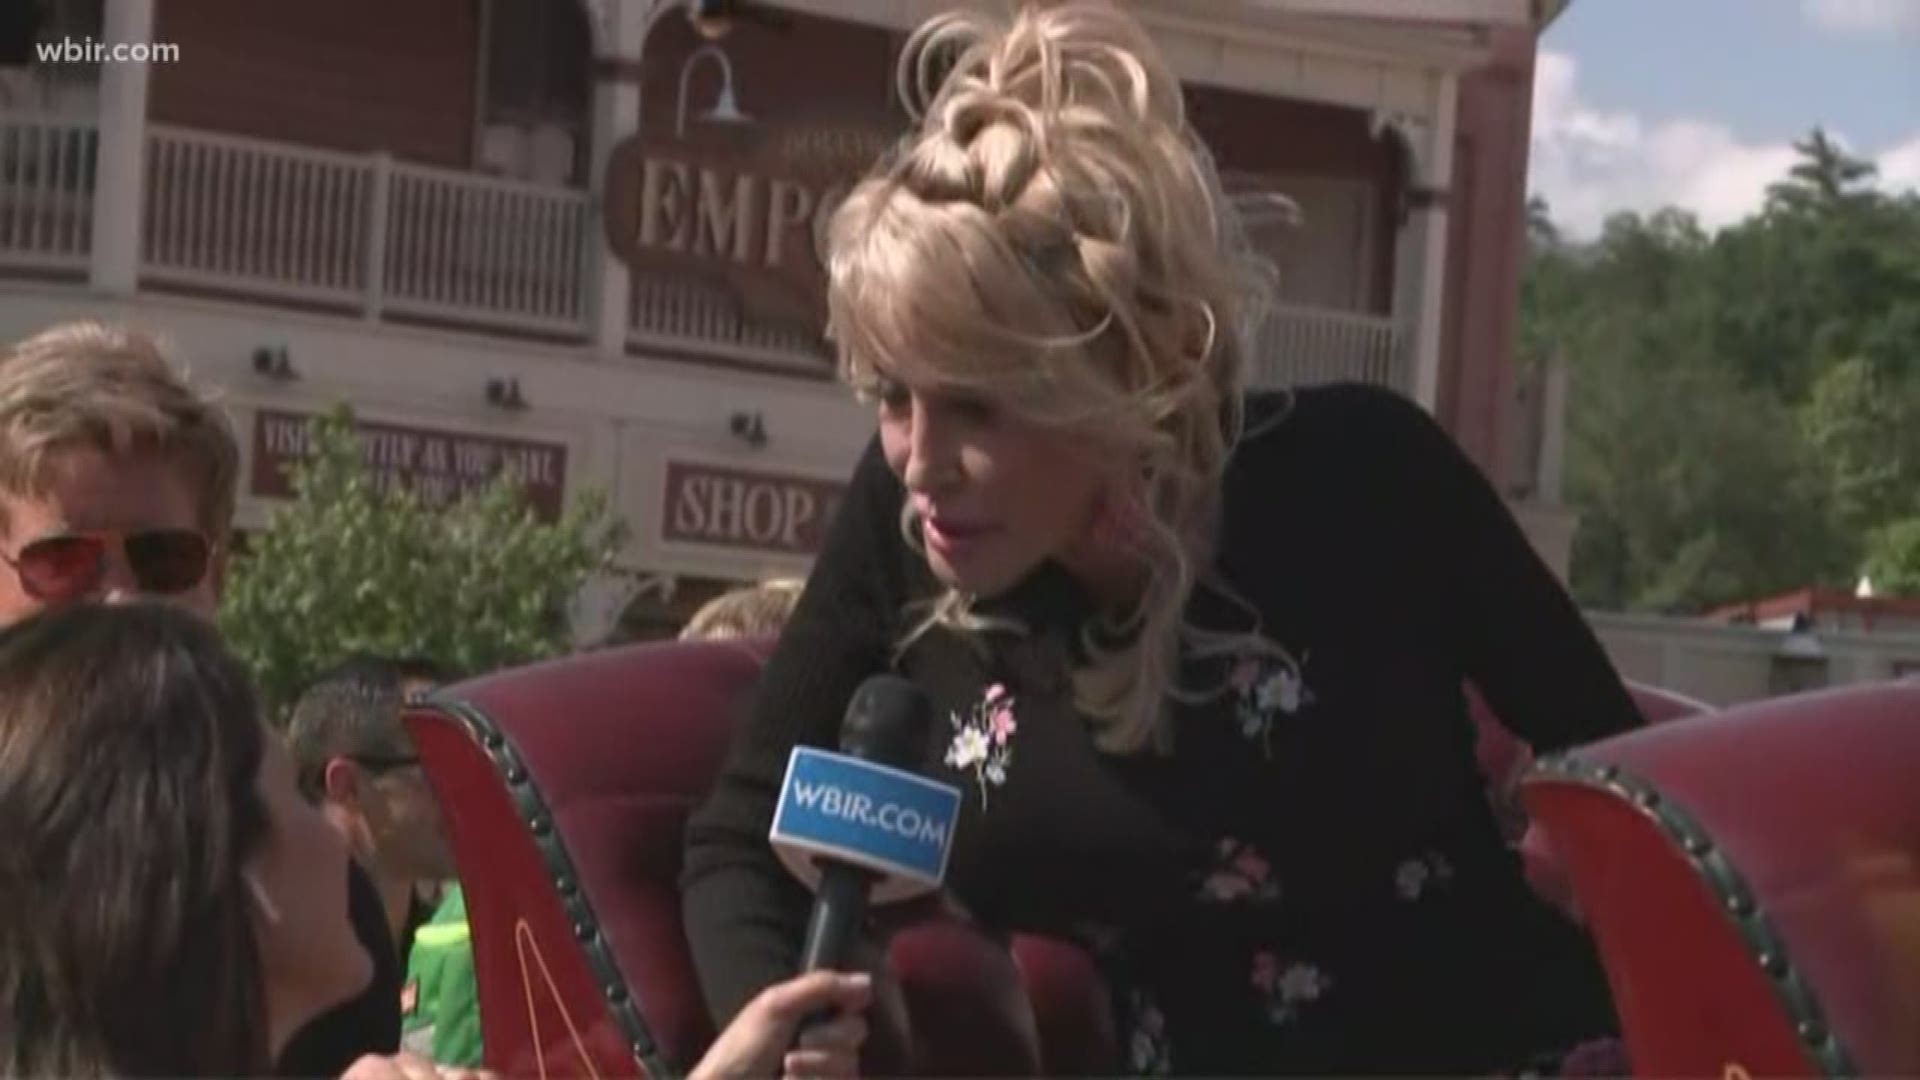 Sevier county songbird Dolly Parton returns to East Tennessee to officially open Dollywood's 'Wildwood Grove'. Dolly's visit to the park means she often leads a parade through the property. May 10, 2019-4pm.